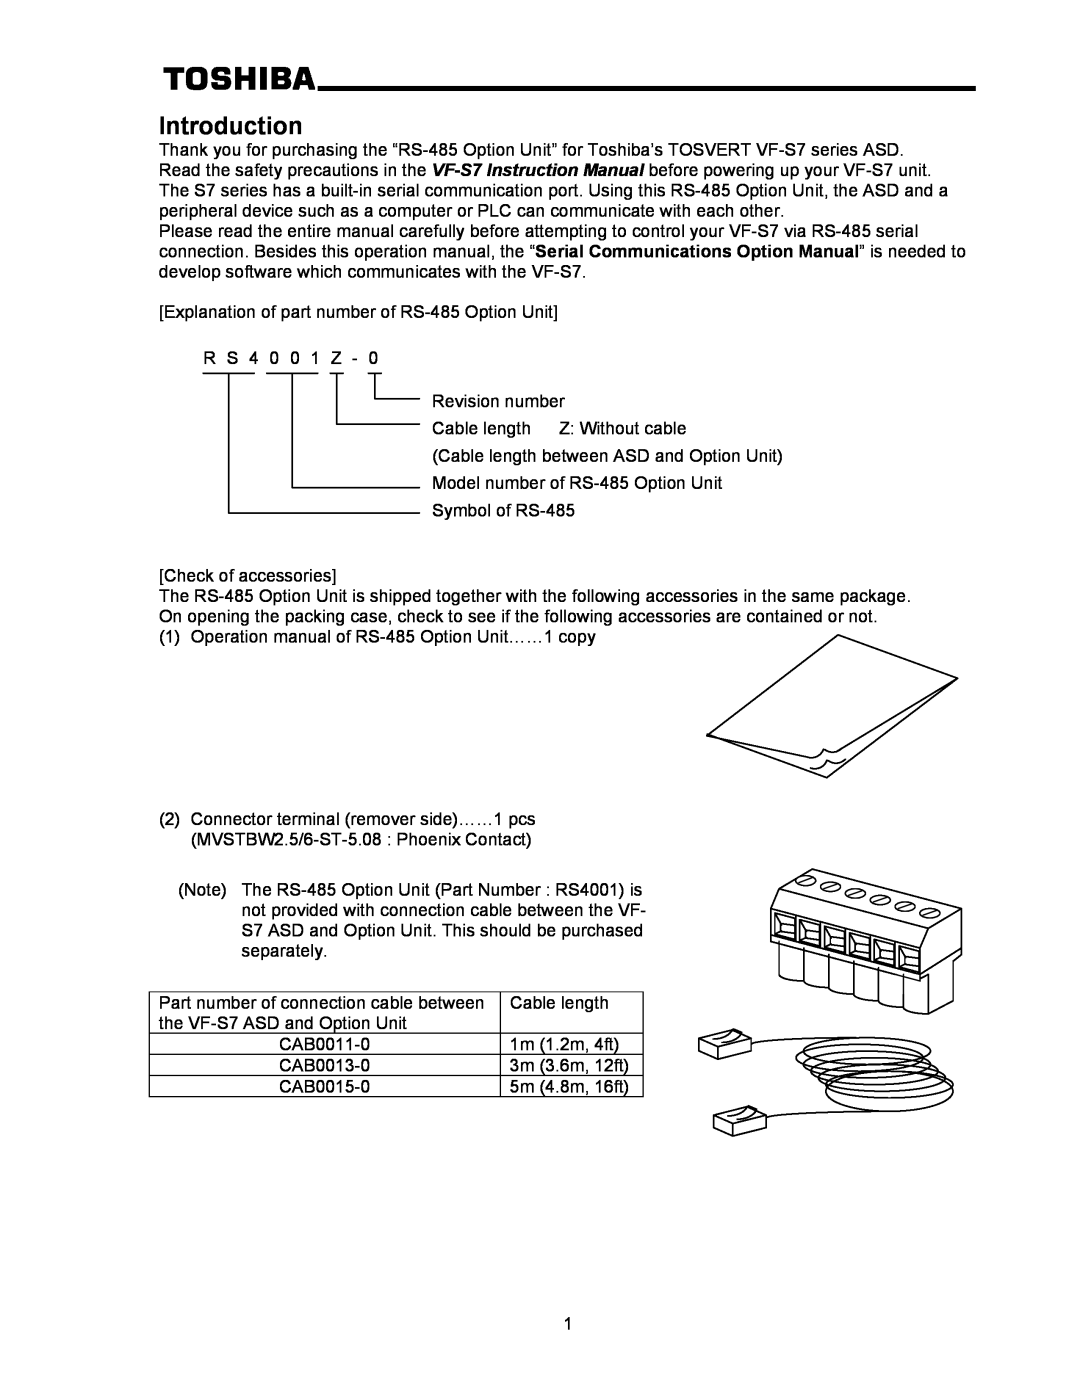 Toshiba RS-485 operation manual Introduction 